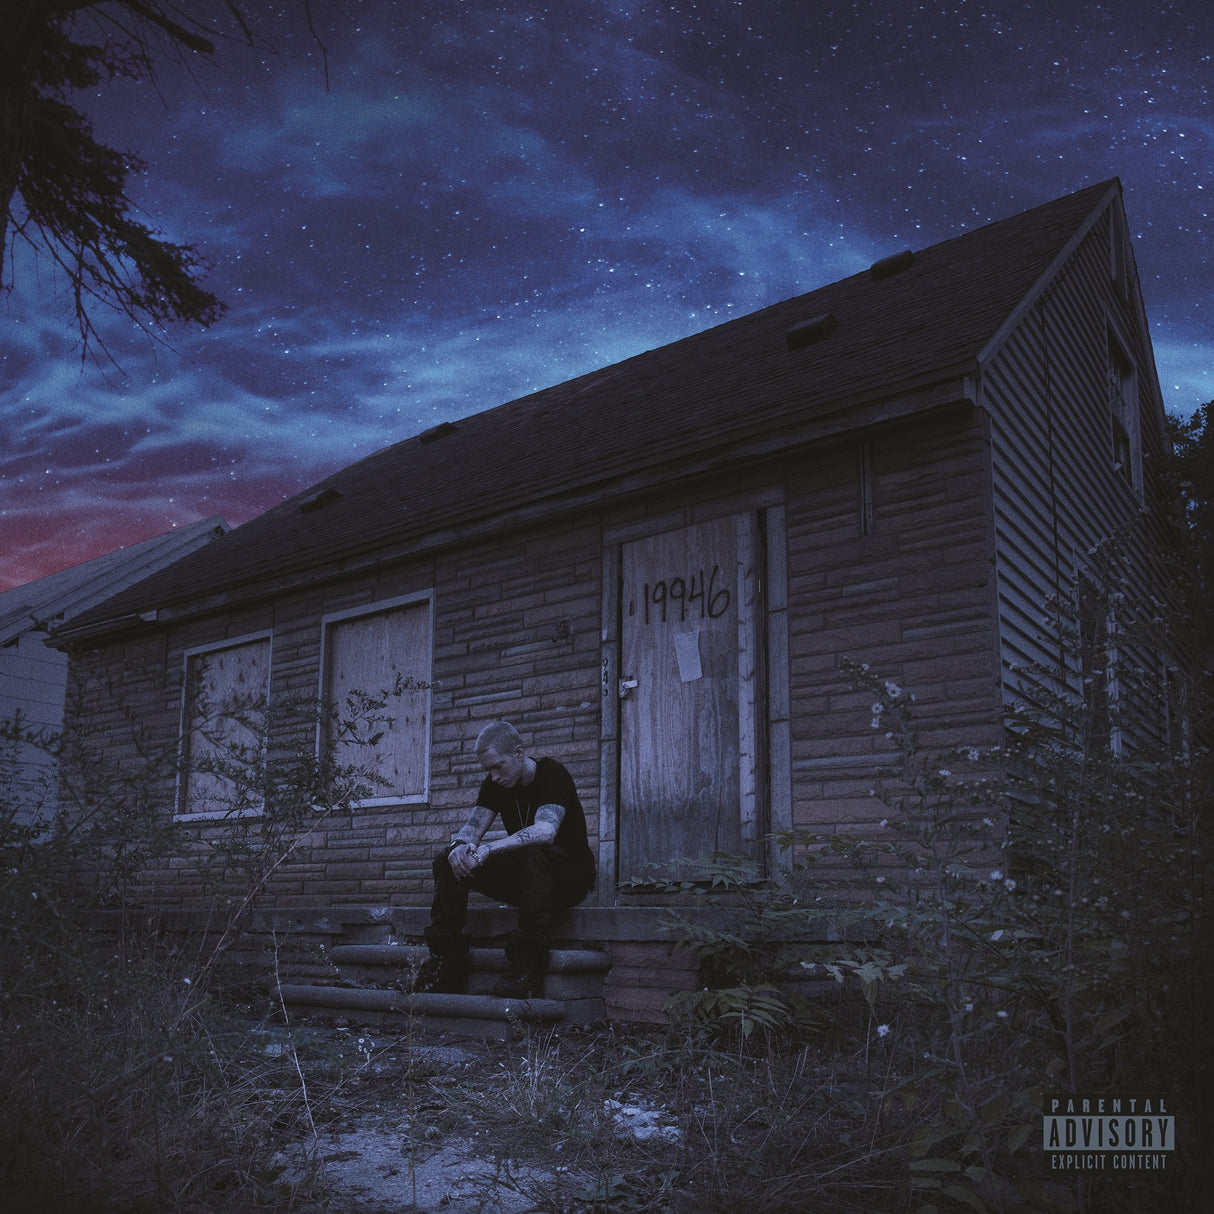 Eminem - The Marshall Mathers LP2 (10th Anniversary Edition) [Expanded Deluxe 4 LP] [Vinyl]